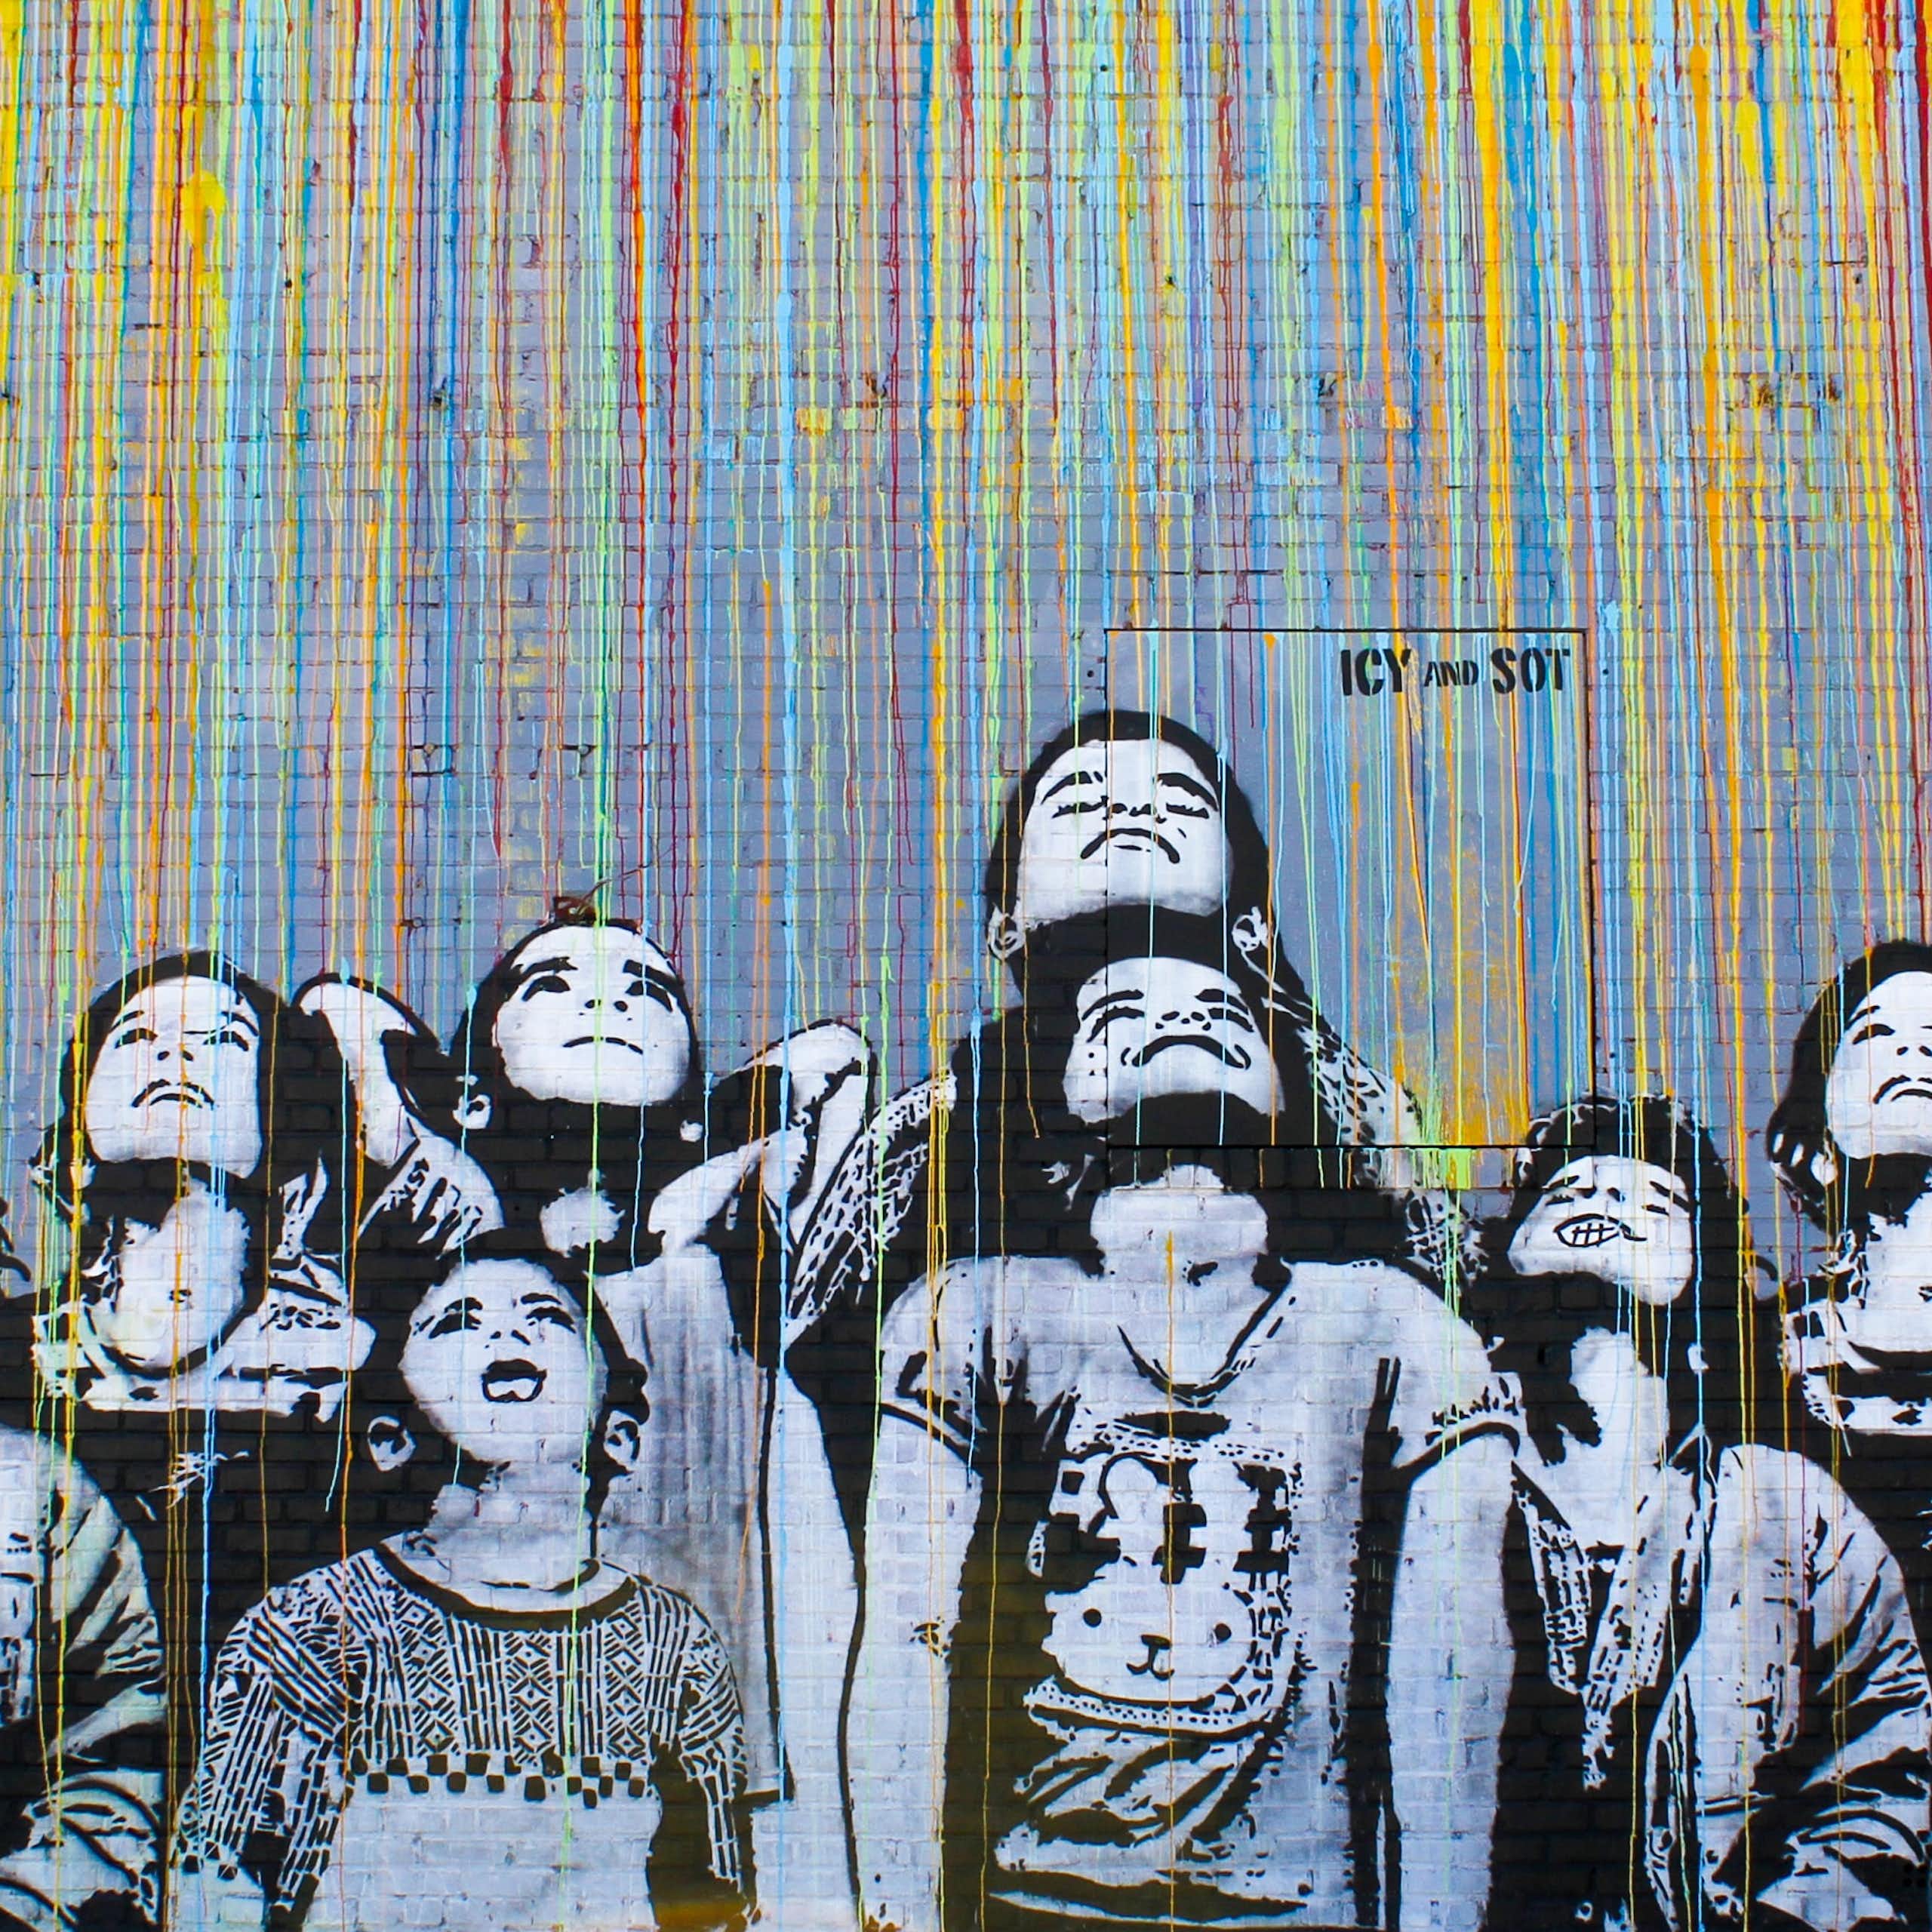 A graphic of schoolchildren painted on a wall. 